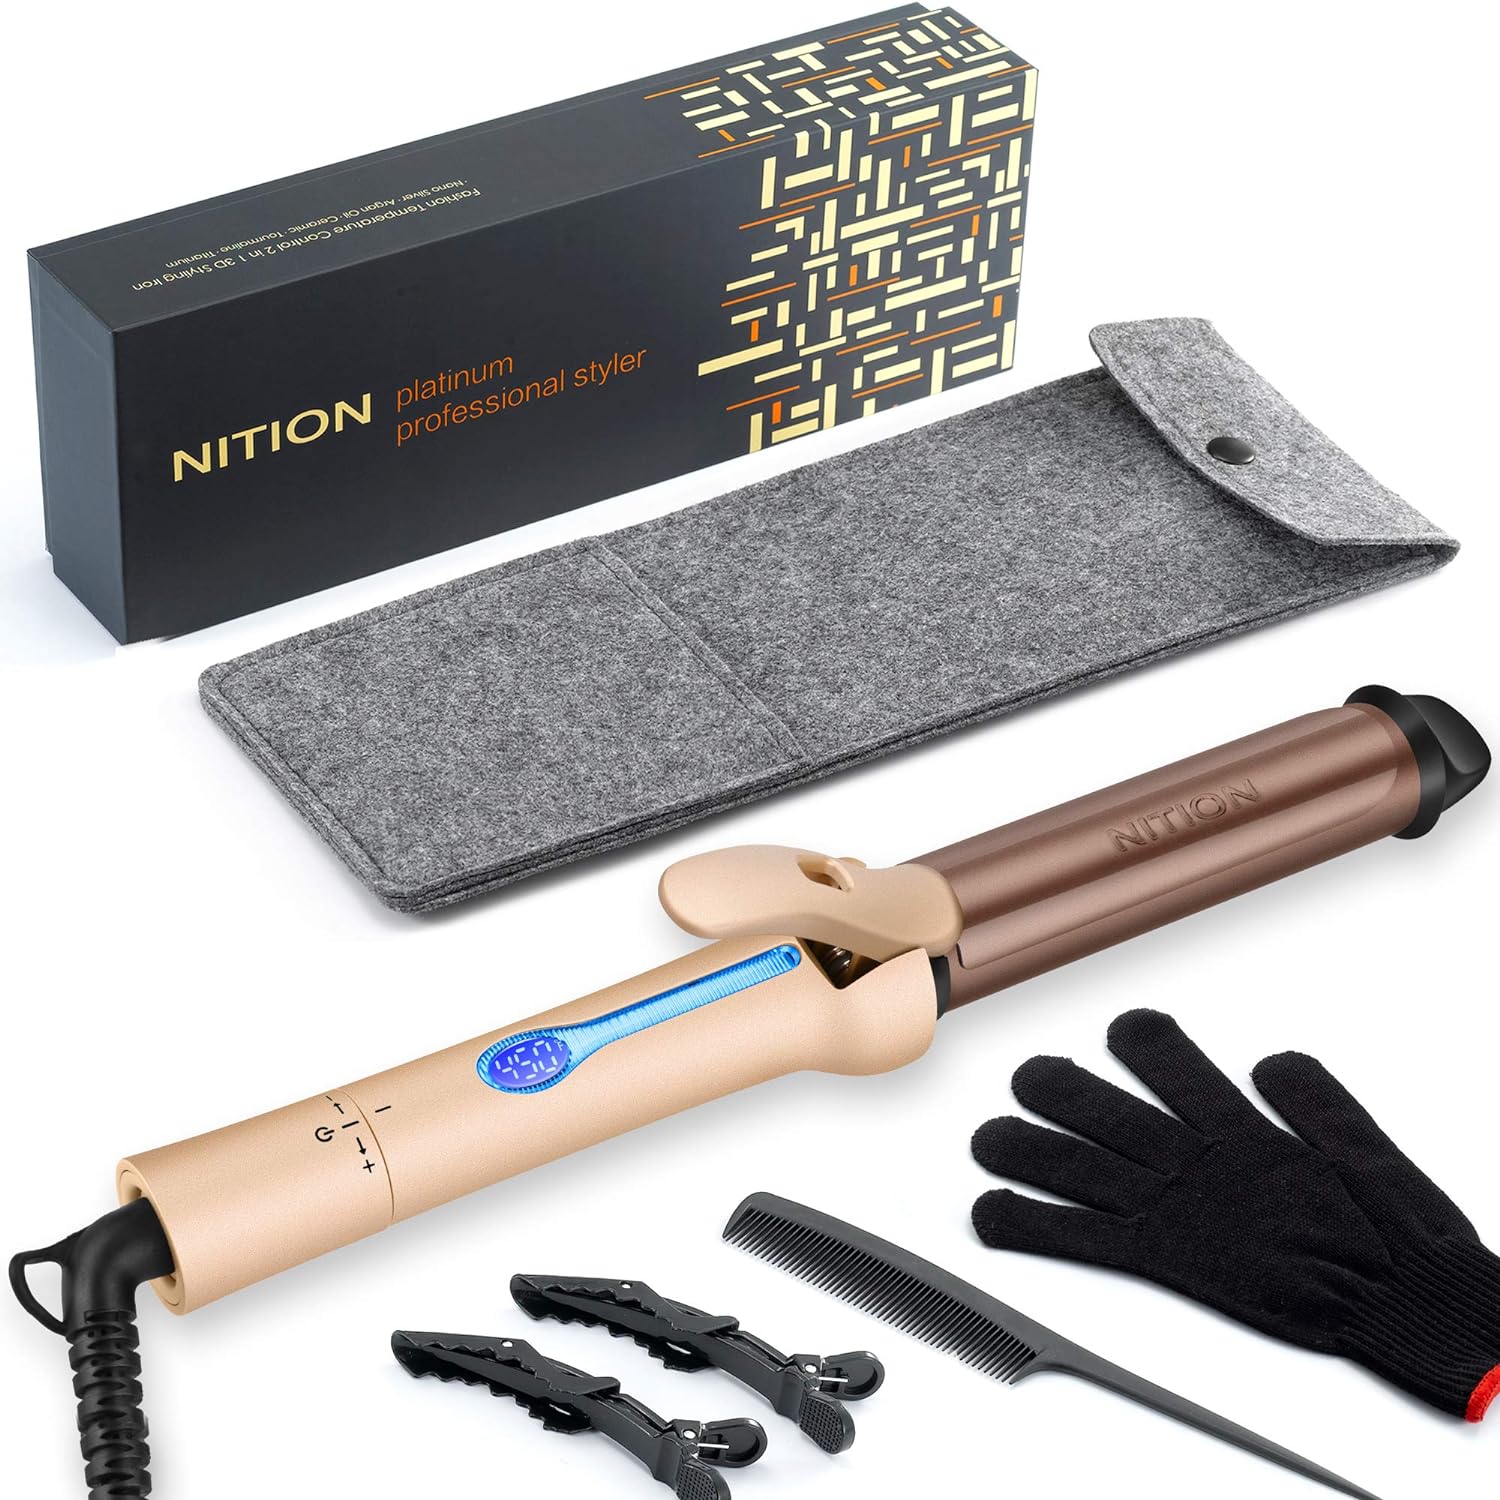 NITION Professional 1 14 inch Curling Iron Argan Oil Ceramic Tourmaline Titanium Coating Barrel Salon Curling Wand LCD 265°F-450°F for All Hair Type,Ions Hair Curler Waver Maker,Dual Voltage